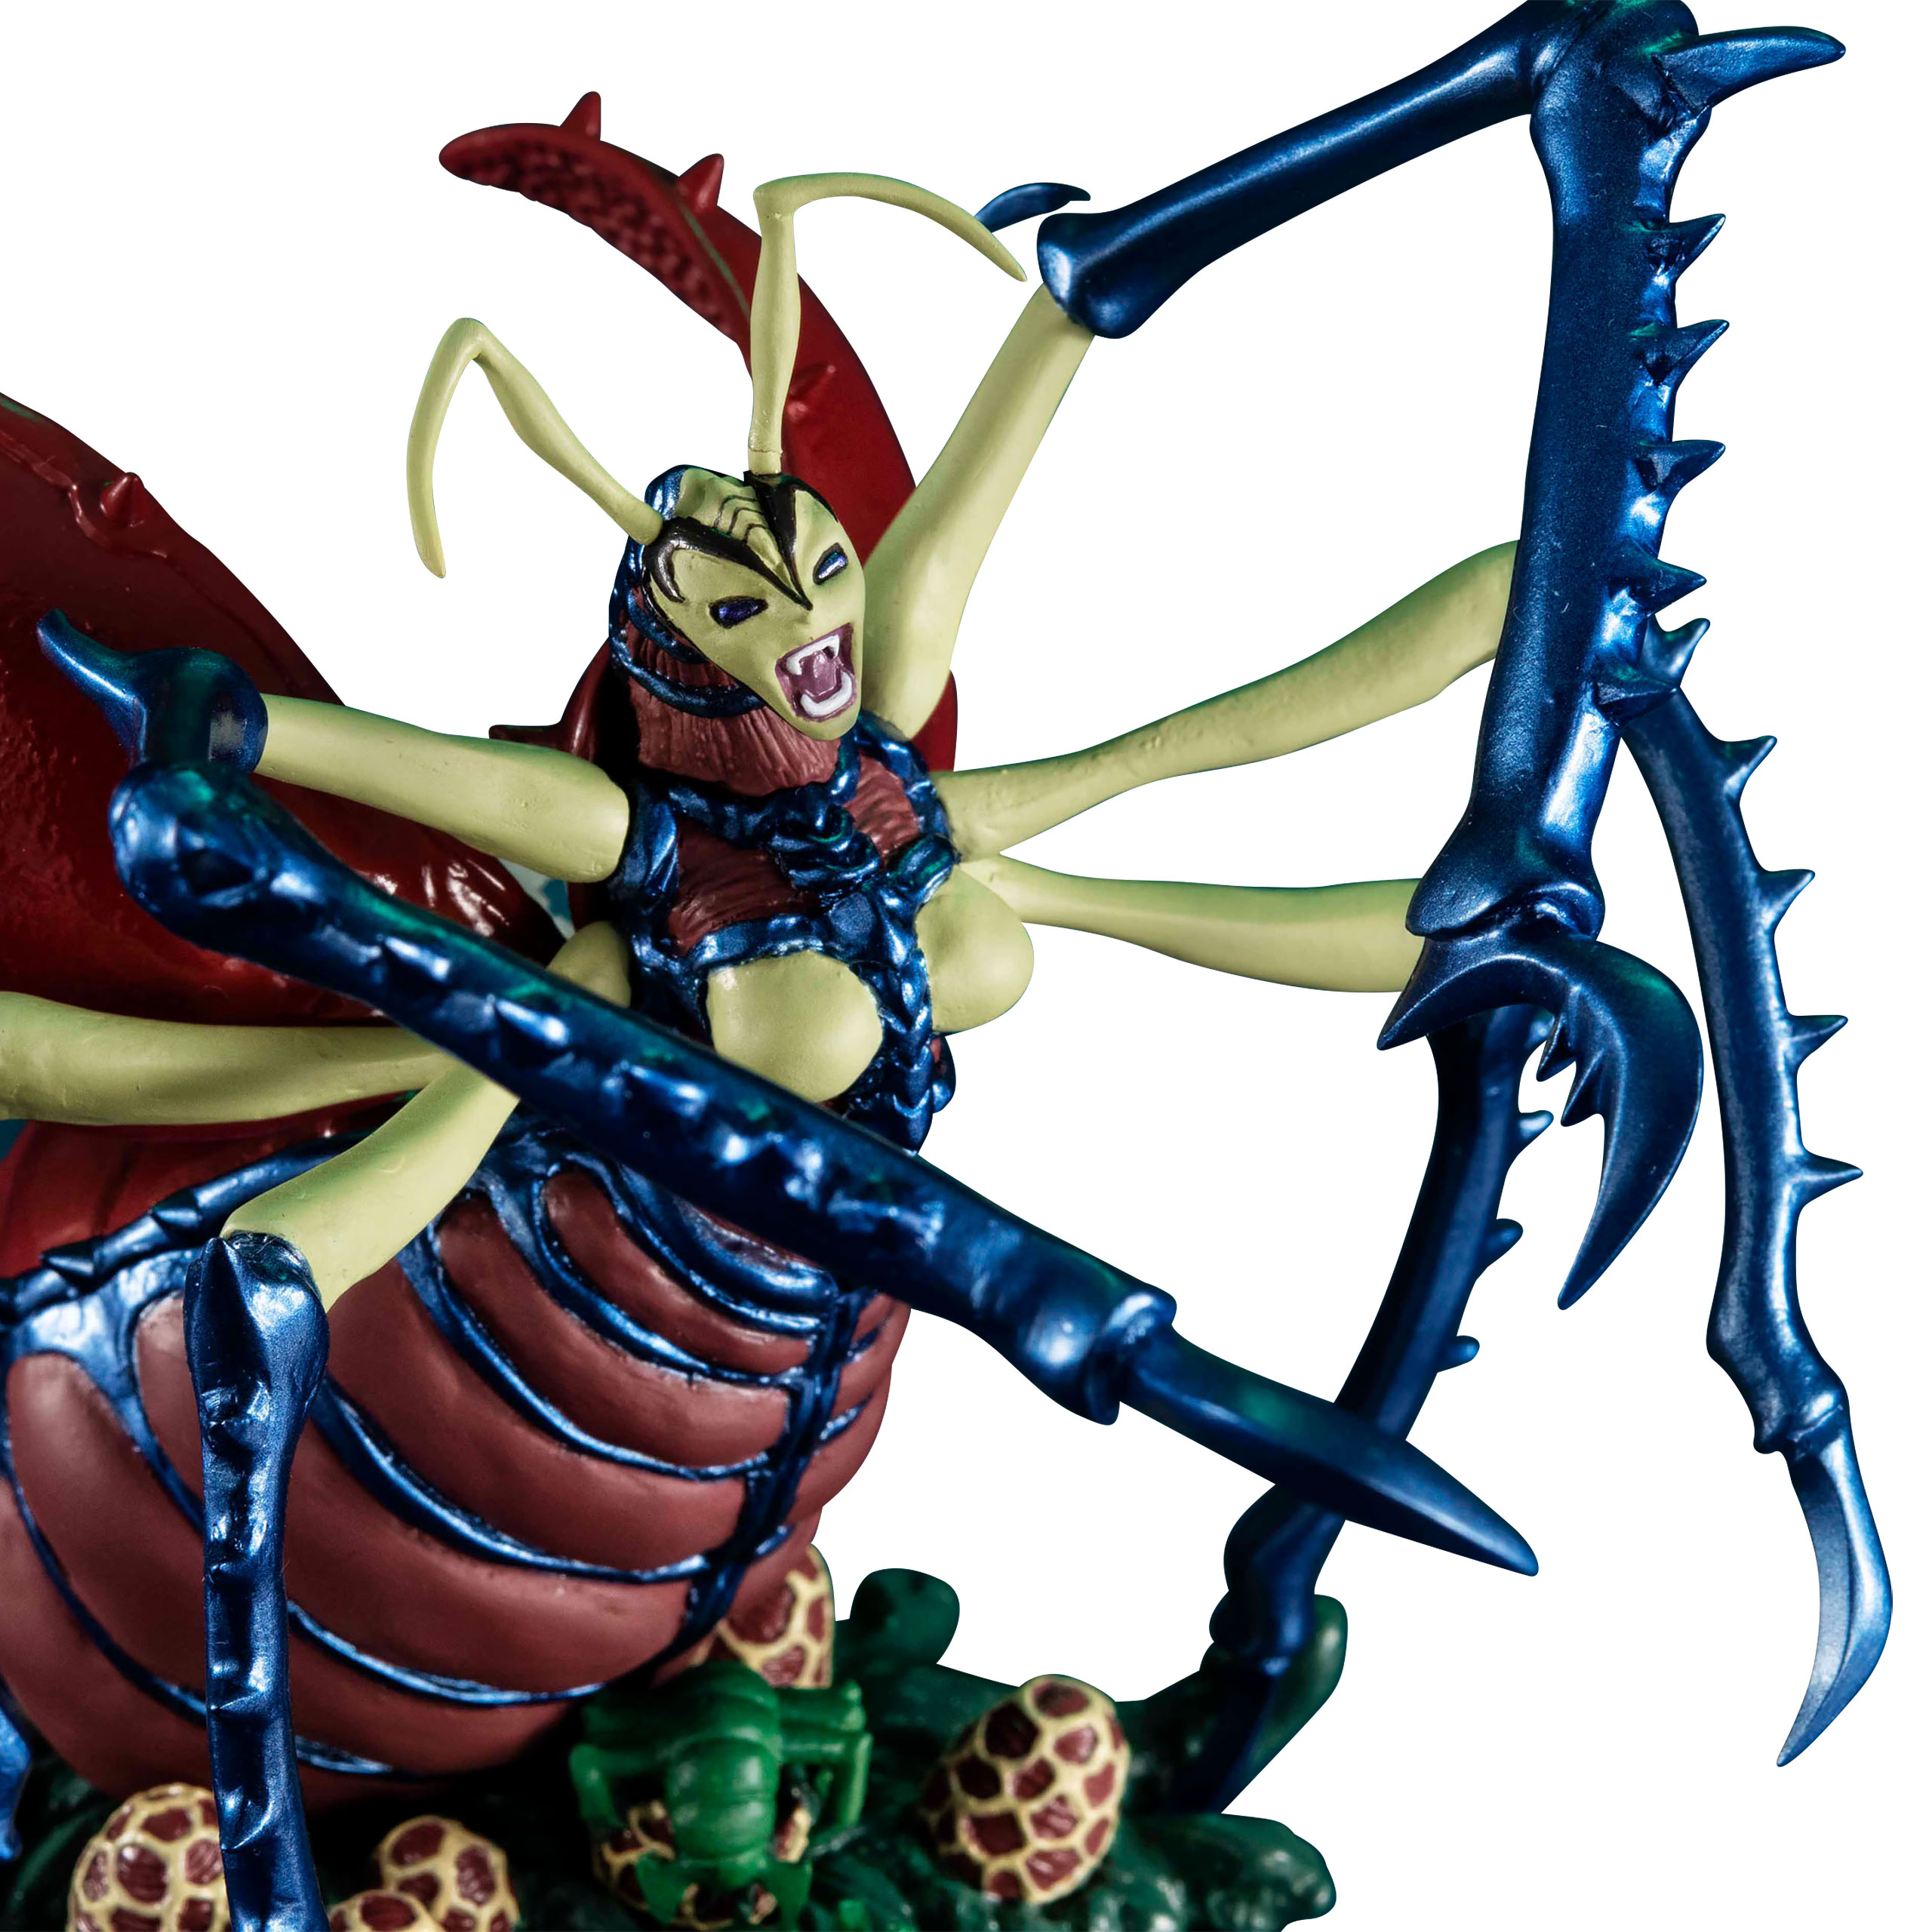 Yu-Gi-Oh ! - Insect Queen Duel Monsters Statue